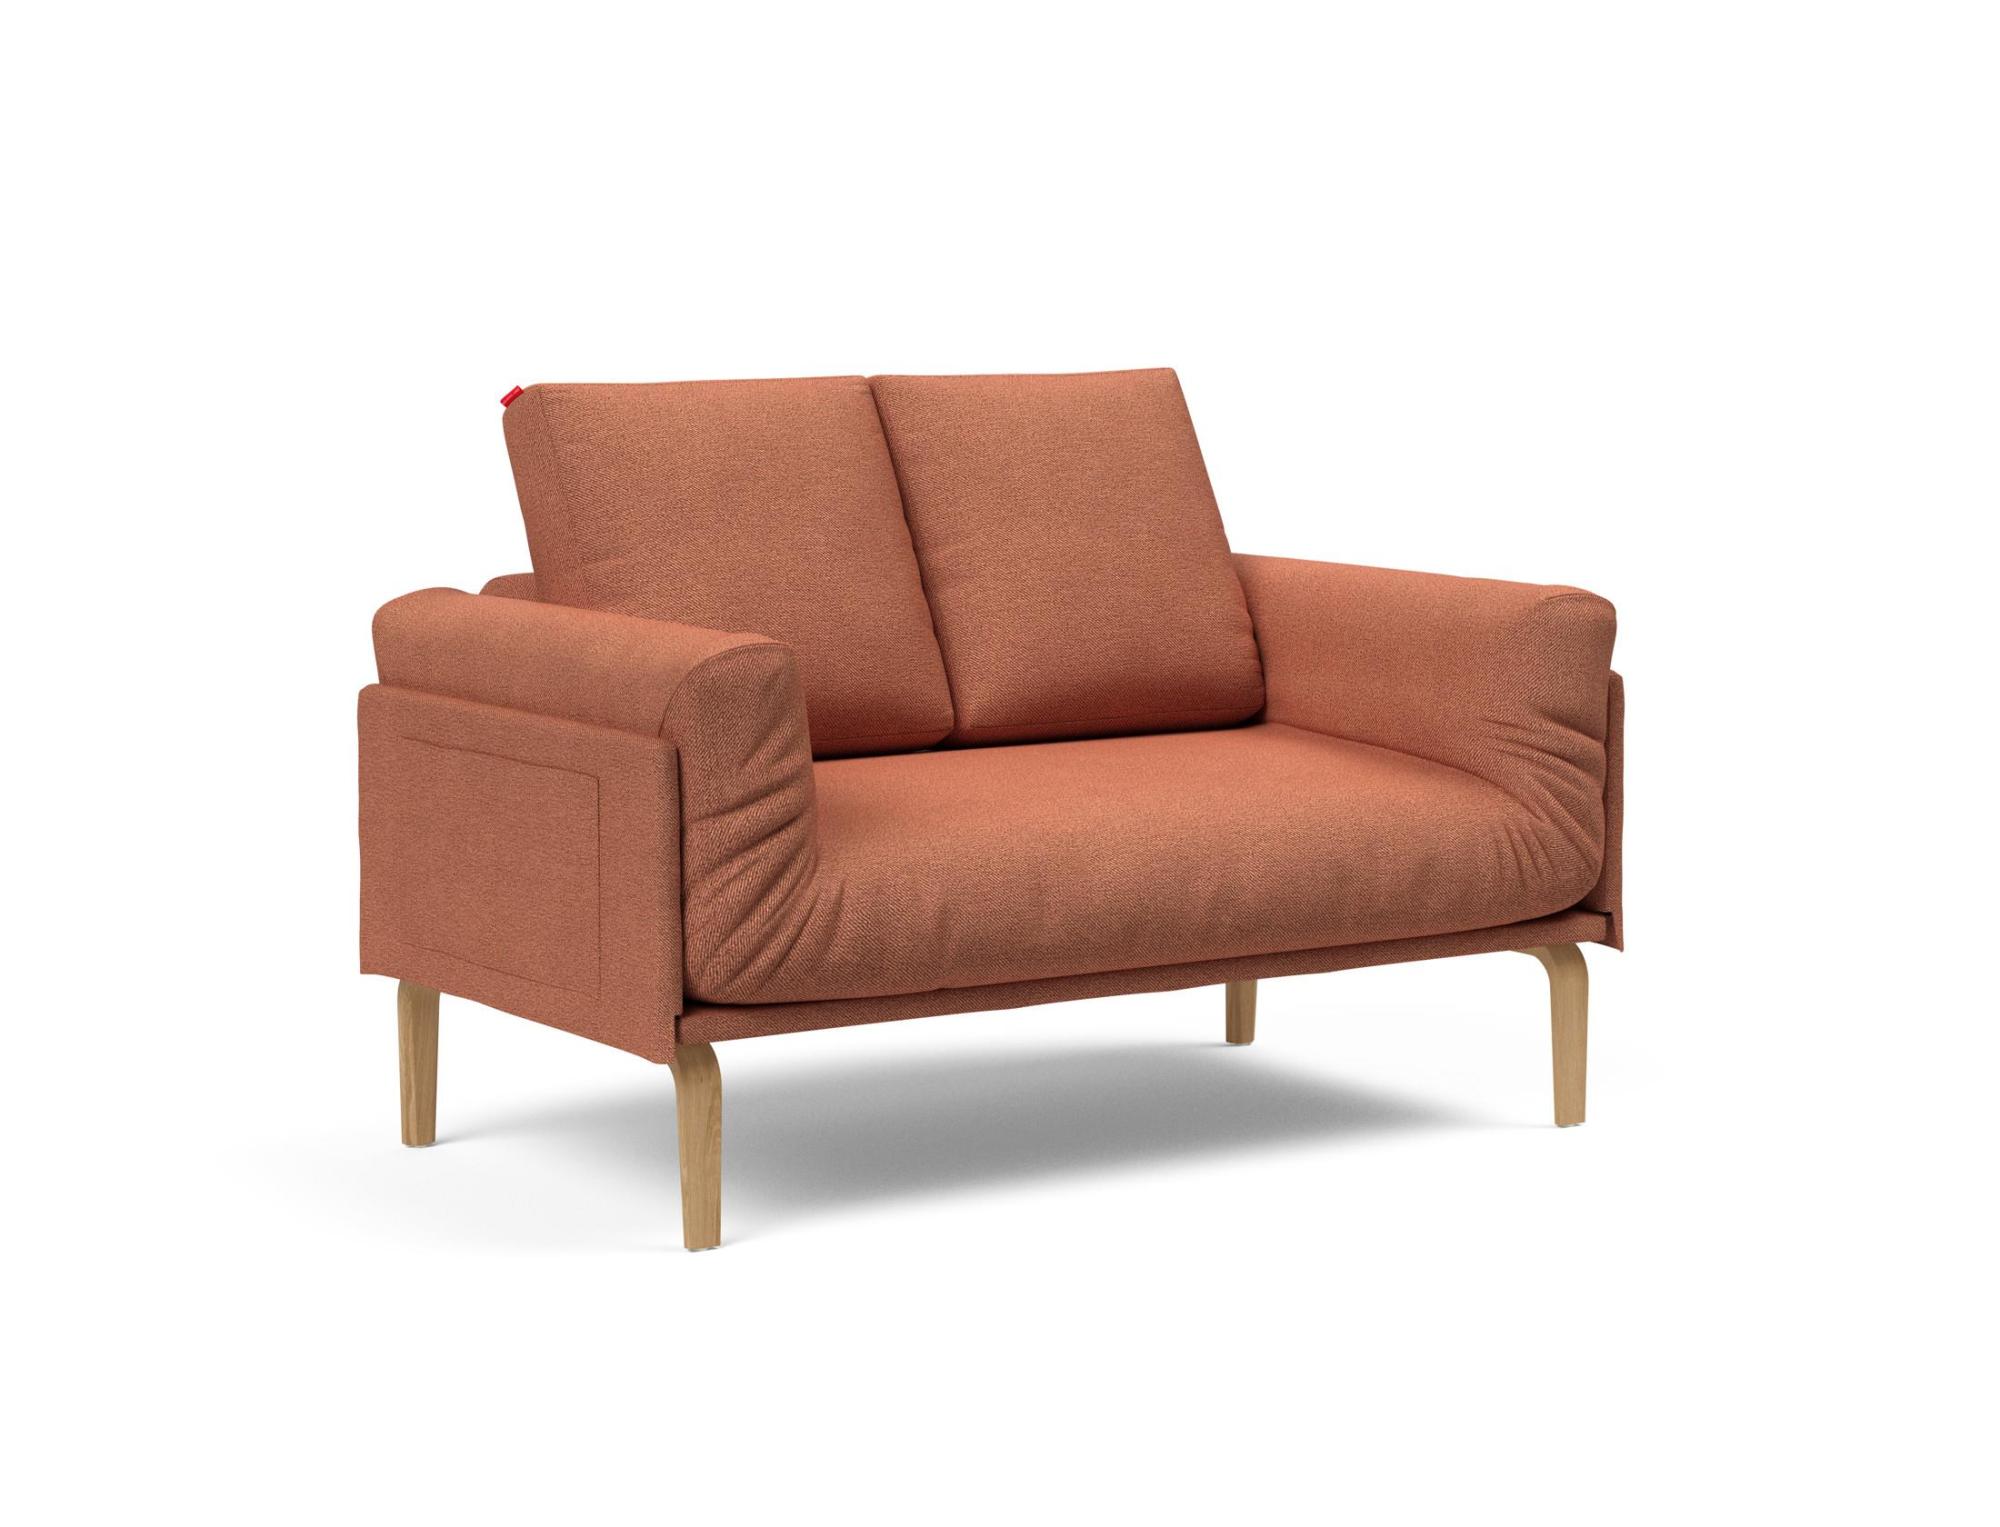 Liege/Daybed Liege/Daybed Rollo - Sofas Innovation